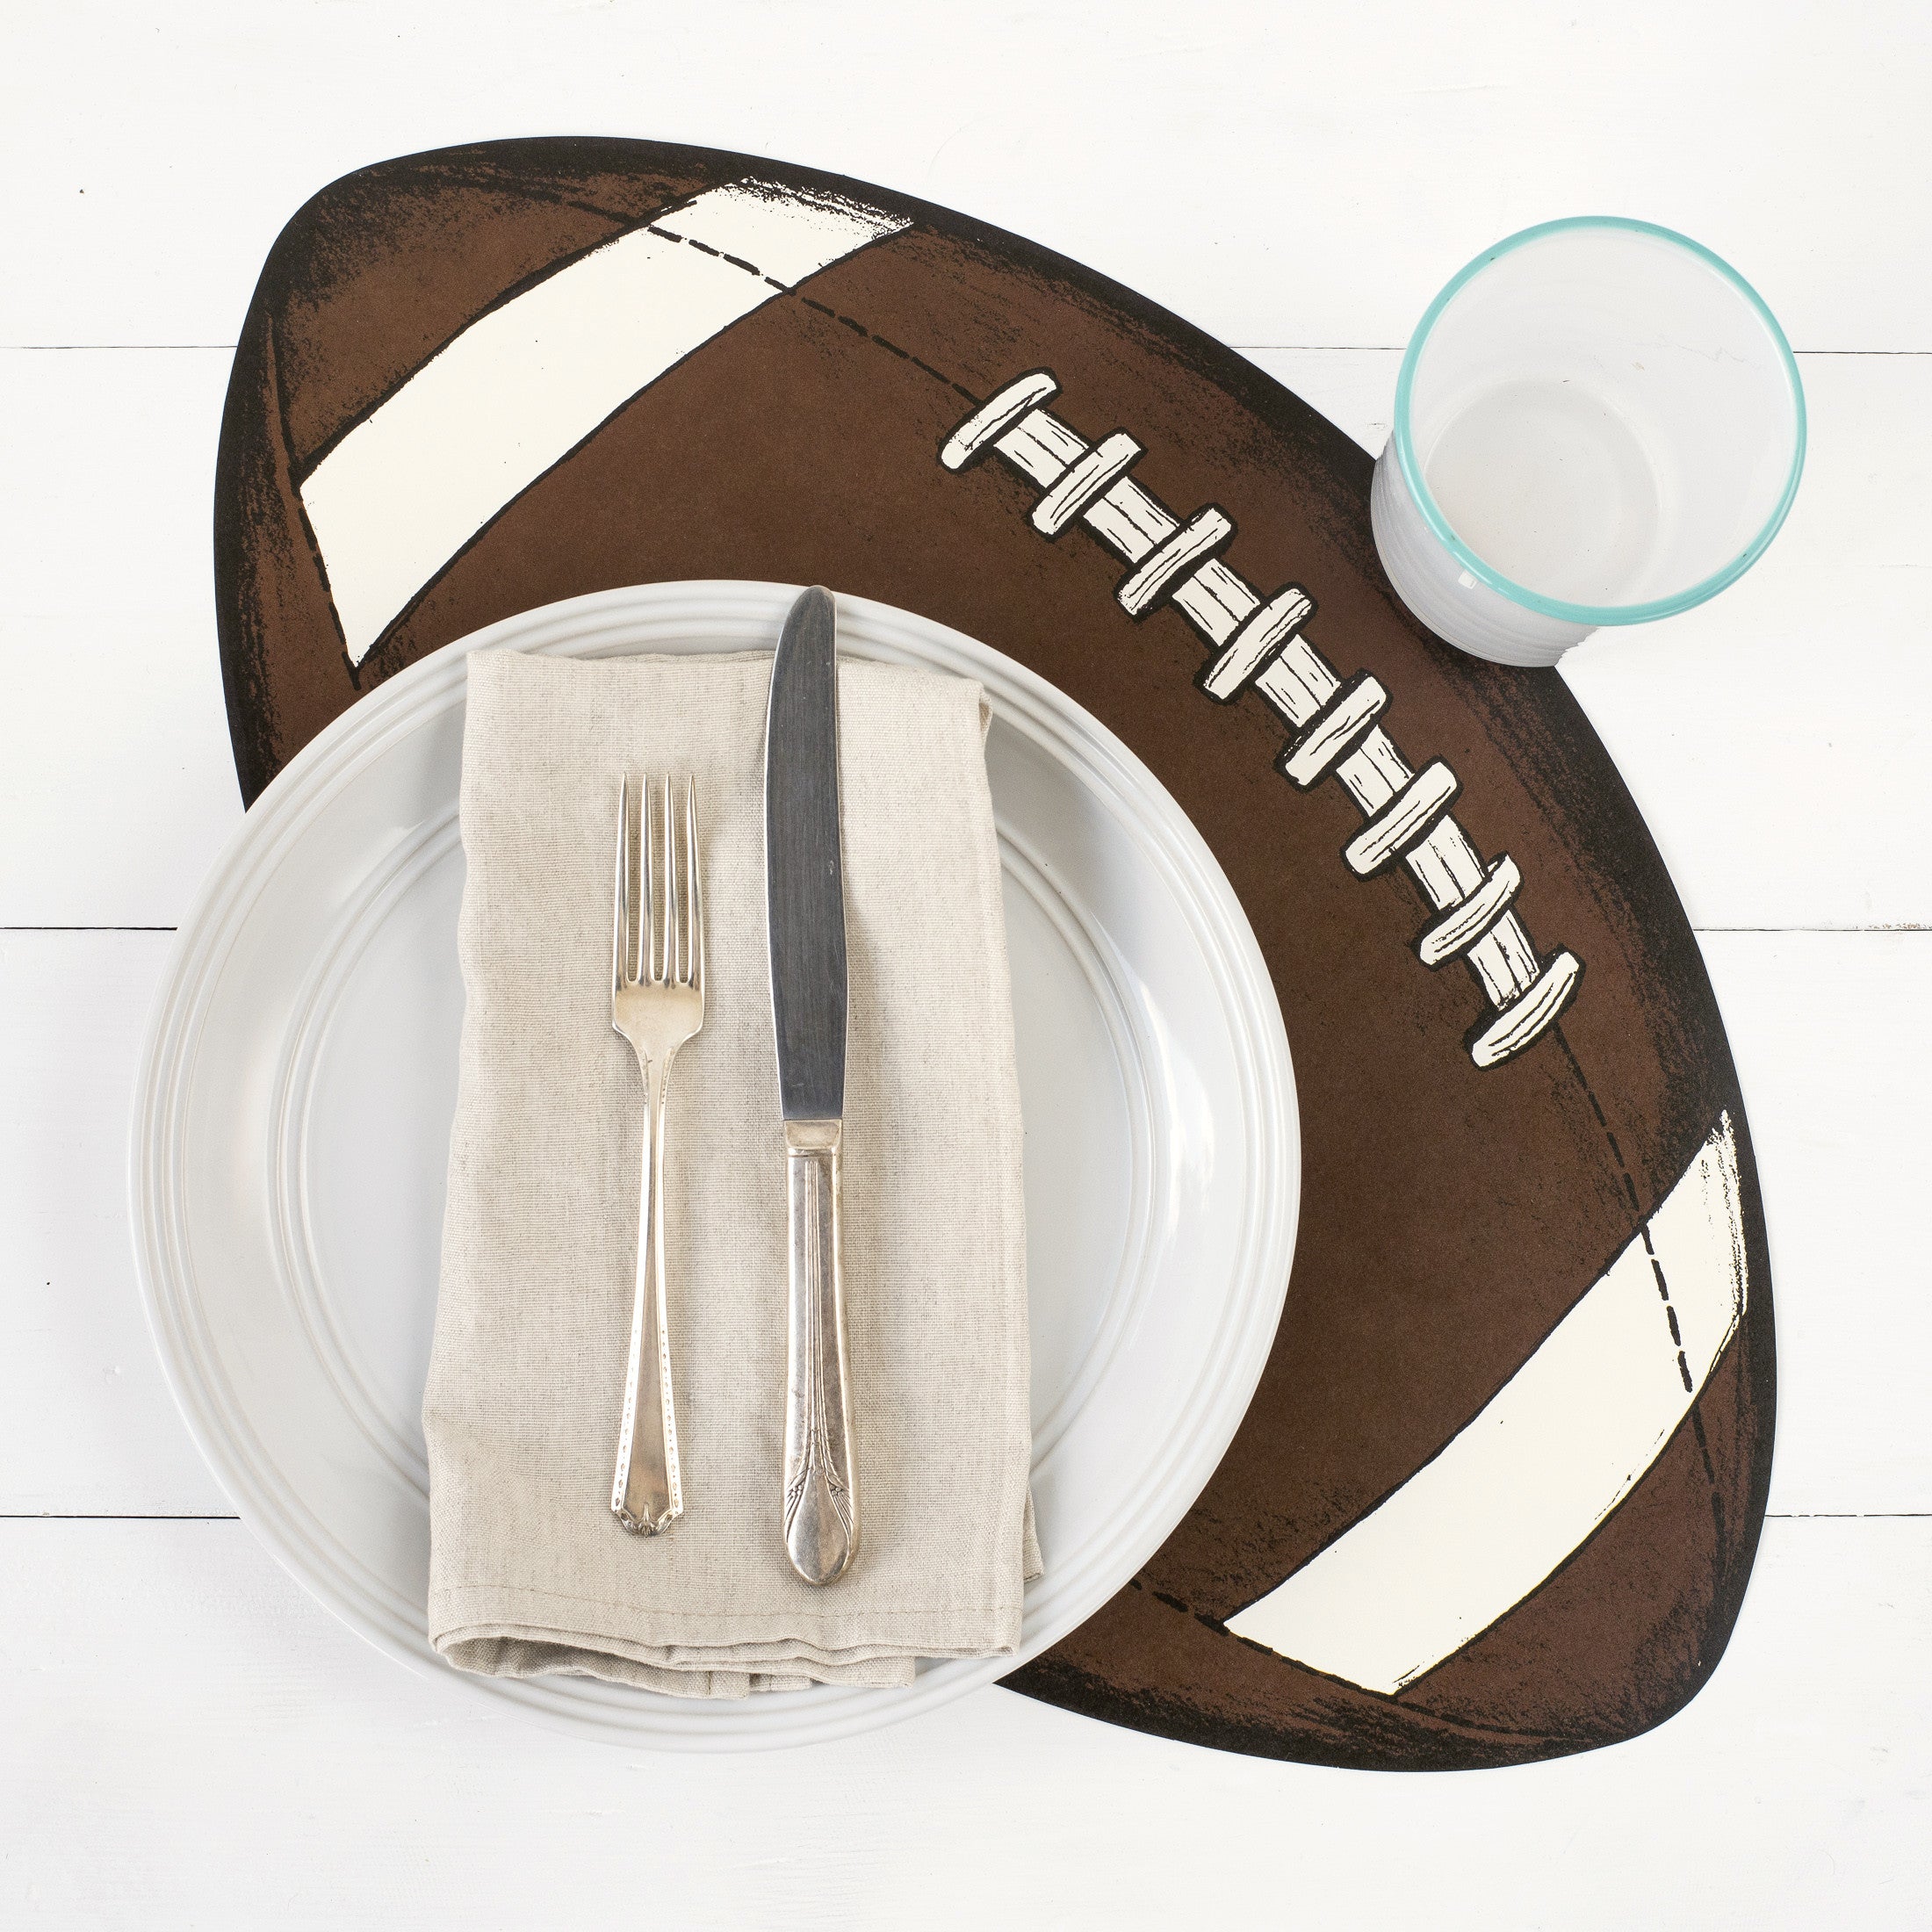 An Hester &amp; Cook die-cut football placemat with utensils on it, creating a festive tablescape.